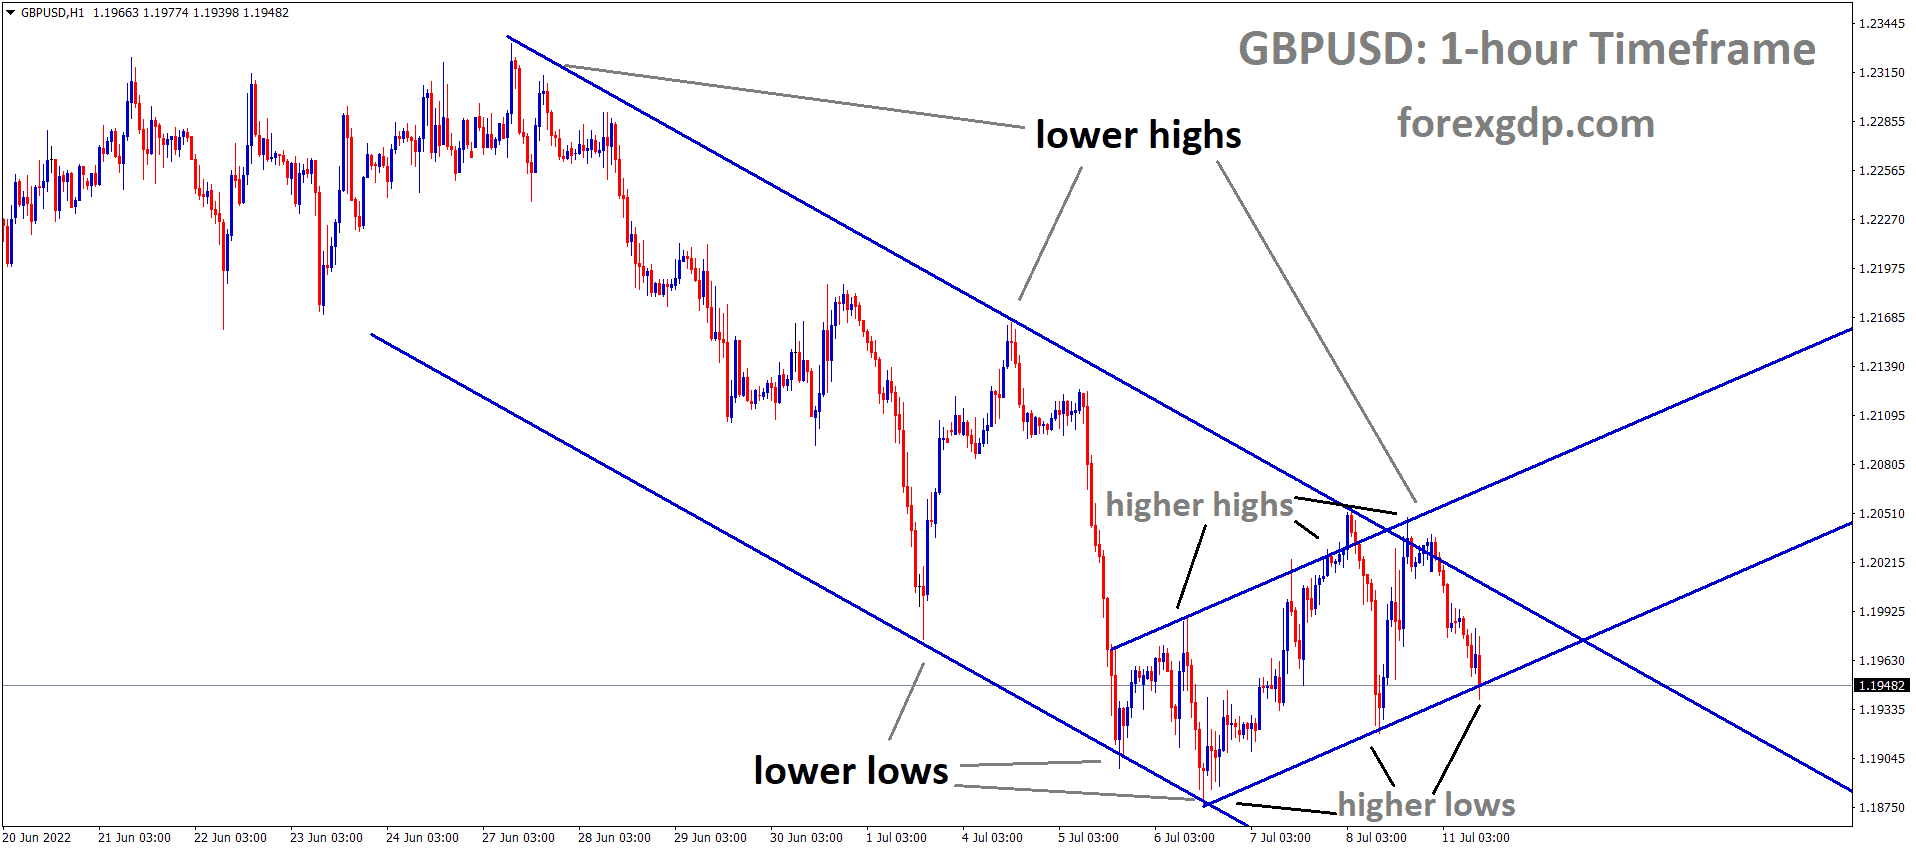 GBPUSD is moving in the Descending channel and the market has reached the higher low area of the minor ascending channel .